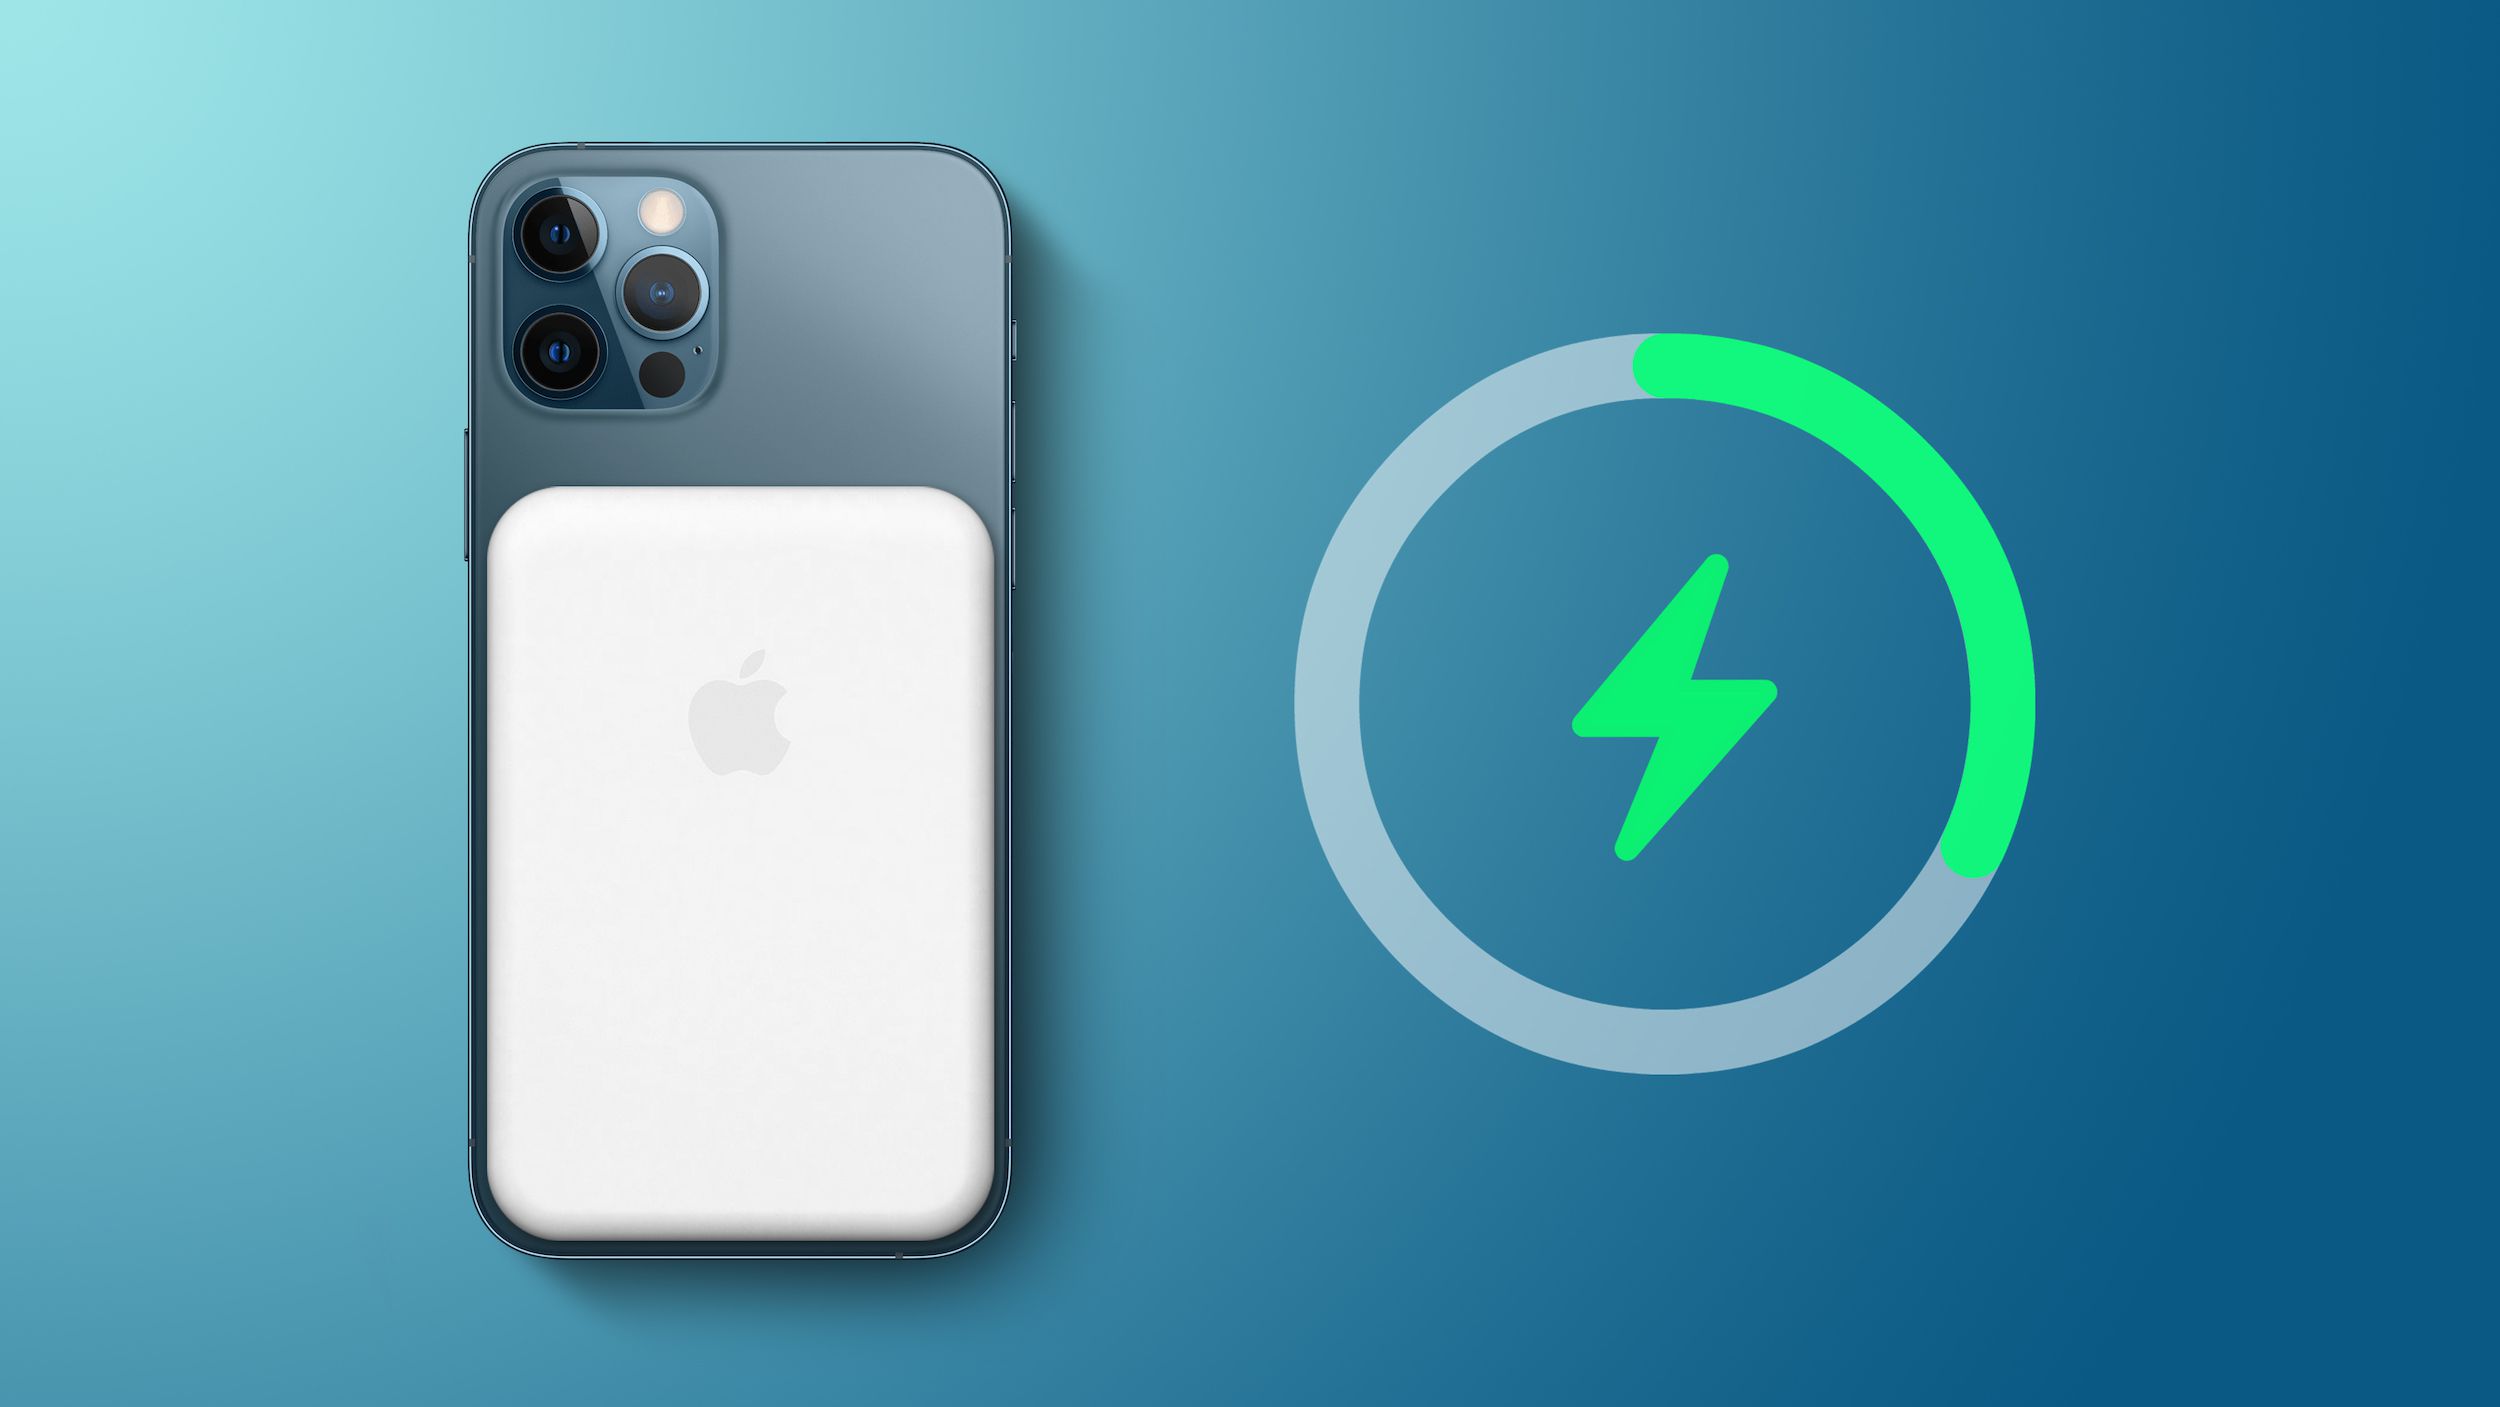 New MagSafe battery pack for Apple iPhone 12: everything we know